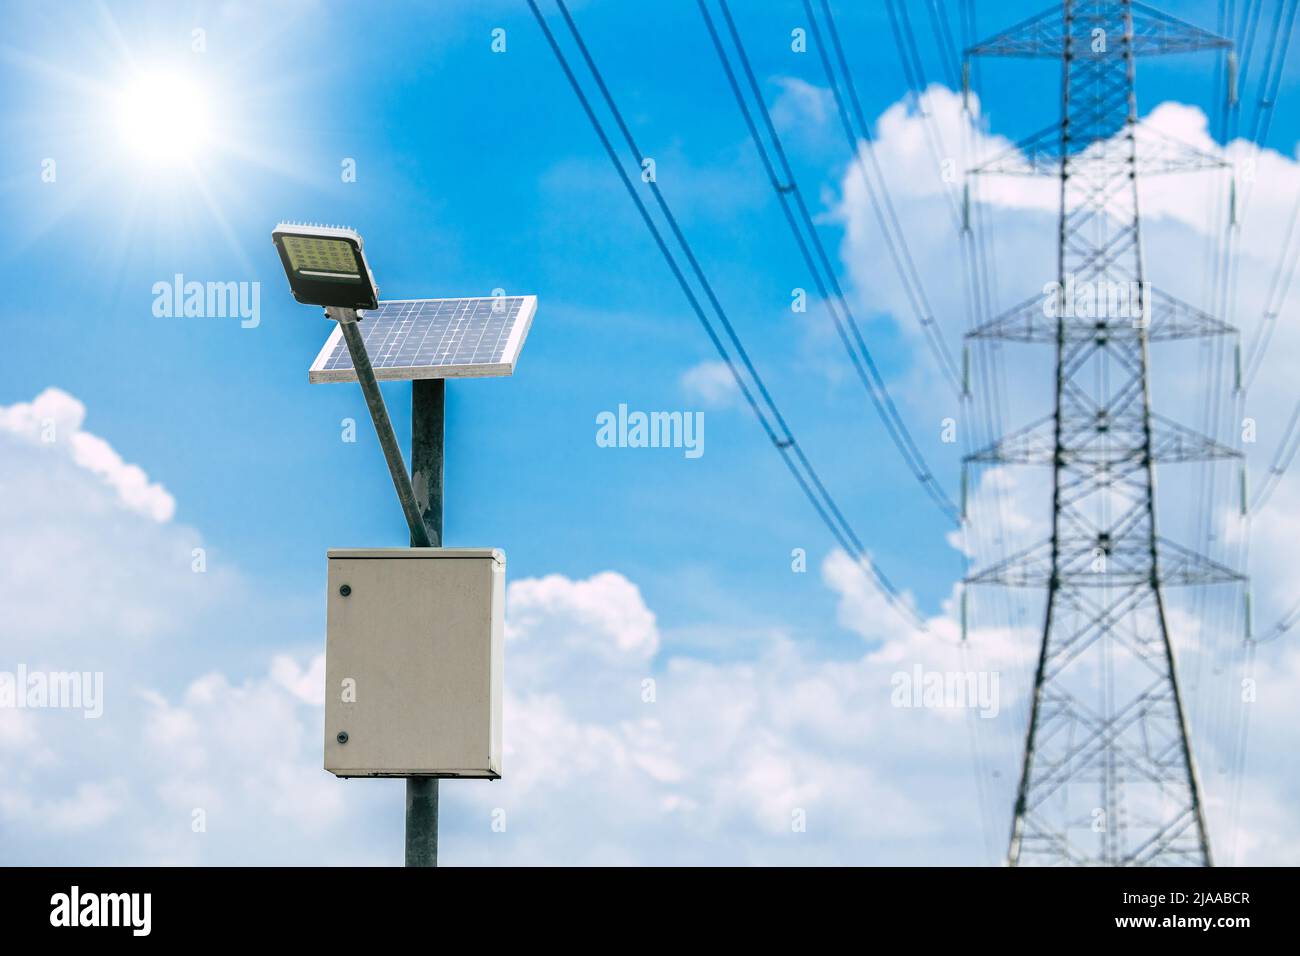 solar panel lamp with high voltage electricity tower on blue sky background for sustainable energy Stock Photo